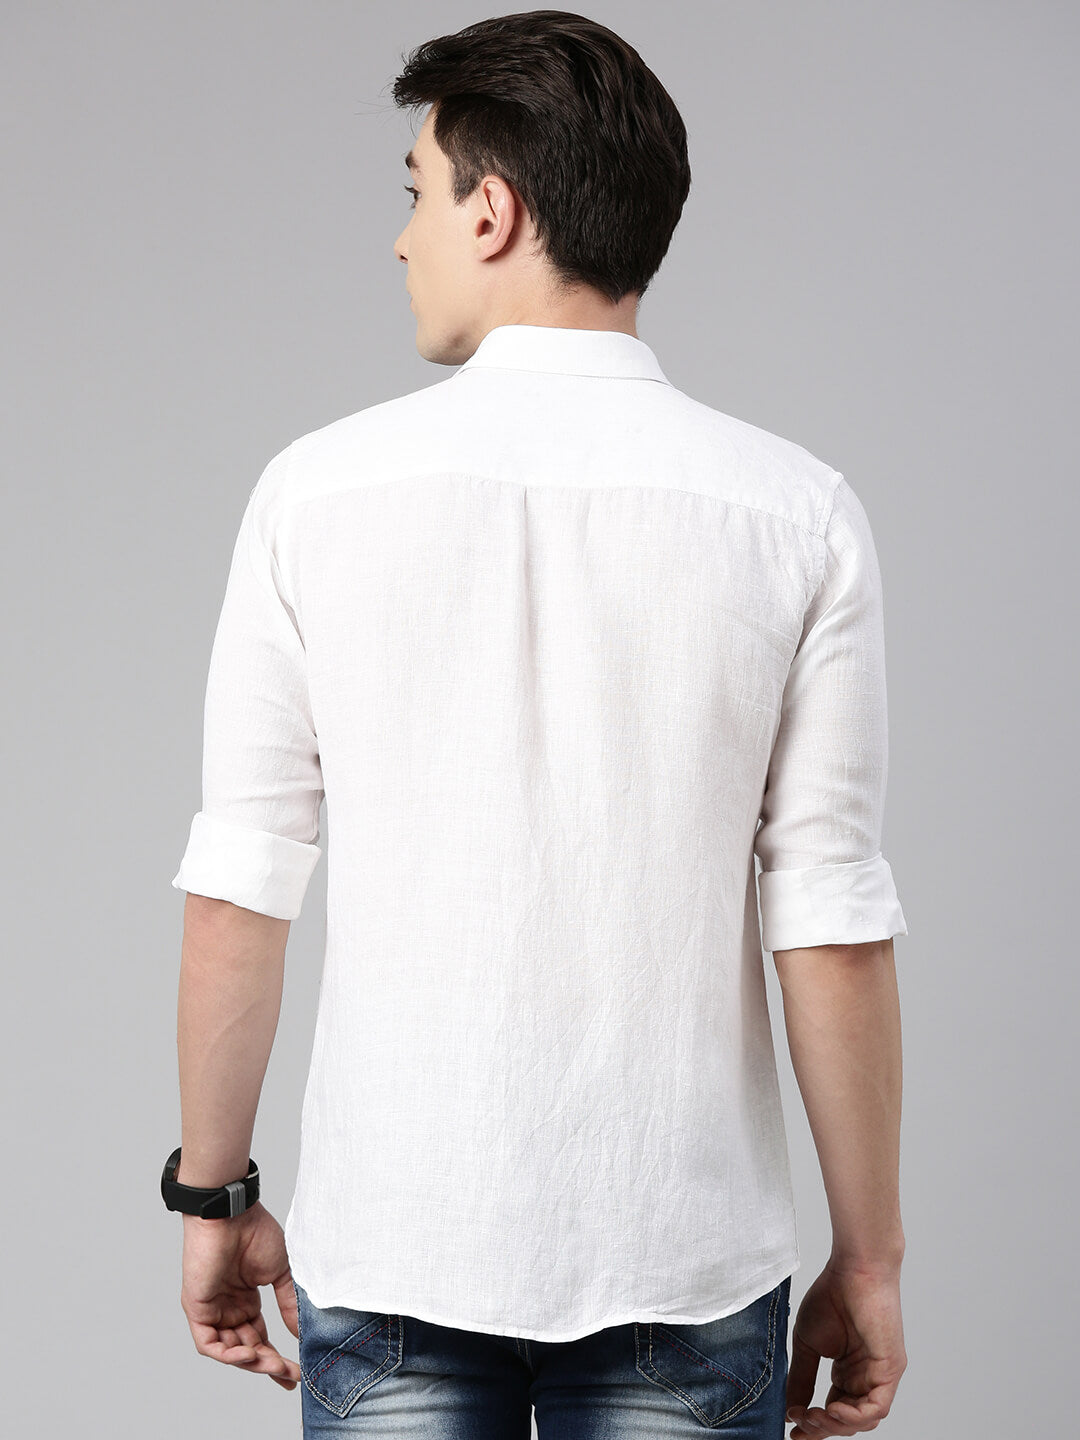 5thanfold Pure Linen - 70' * 70' / lee * lee Fabrics - 
Men Solid Casual White Slim Fit Full Sleev Spread Collar Shirt